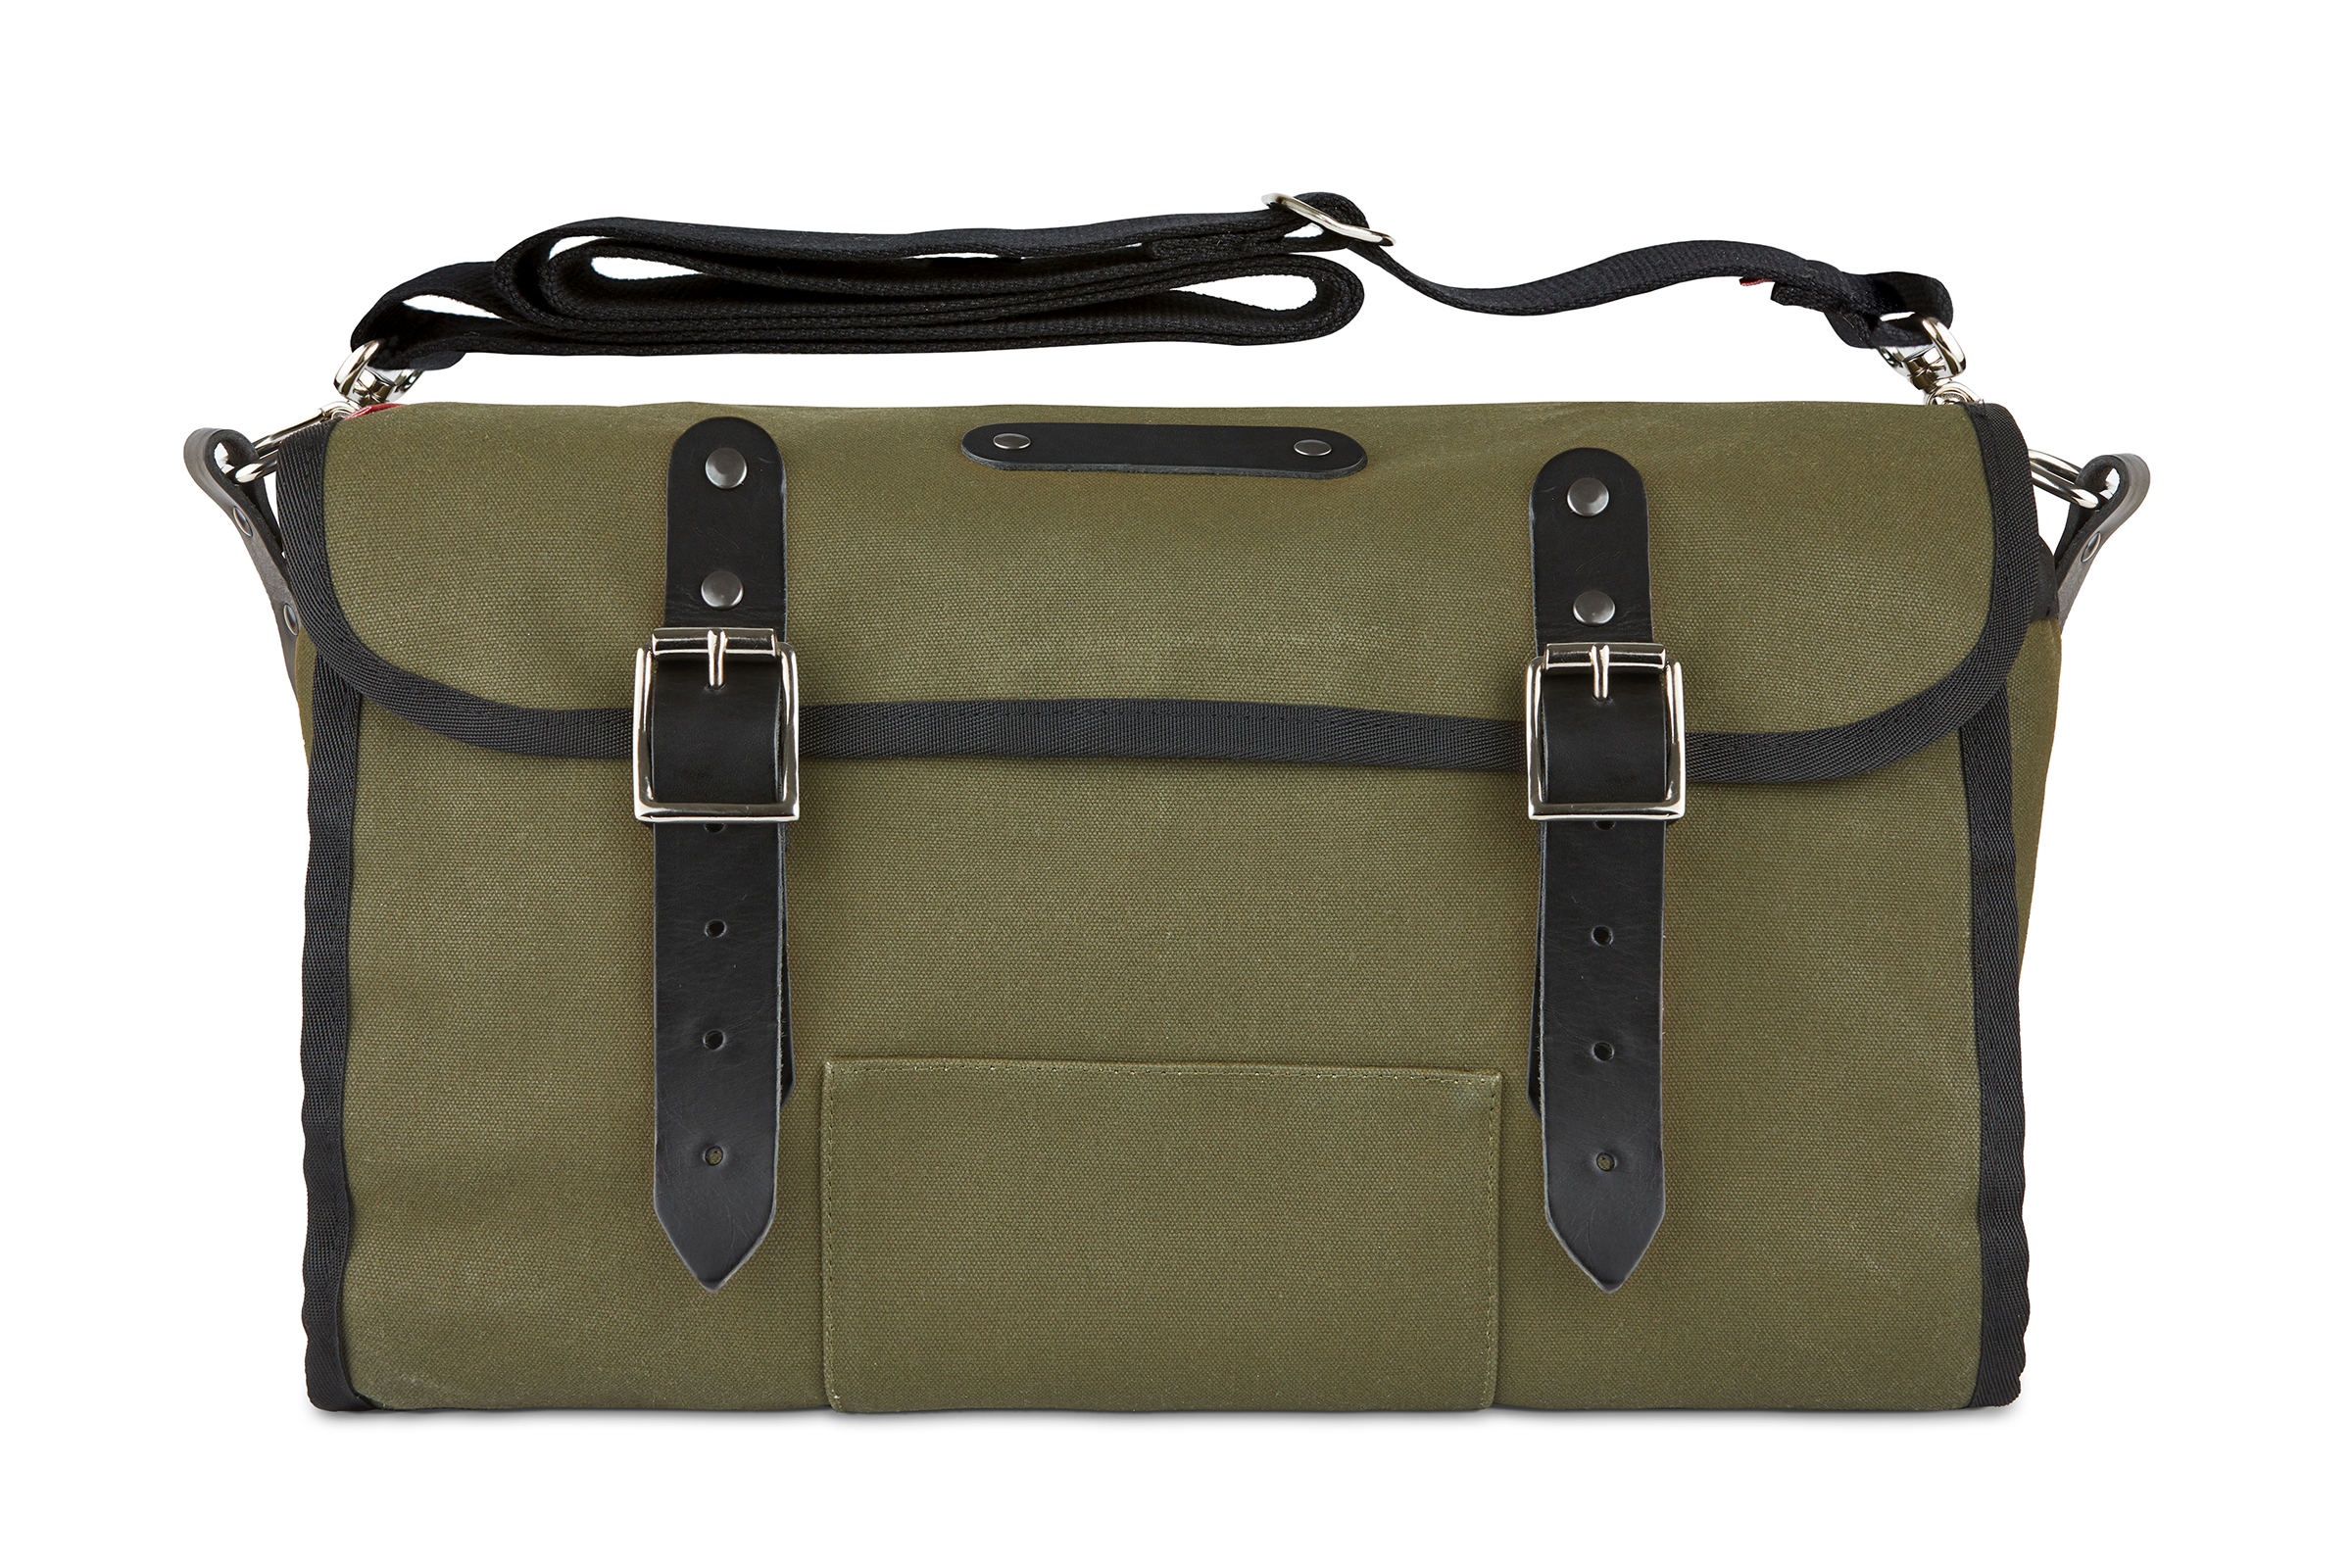 Frost and Sekers Otis saddle bag. Green canvas with black leather.